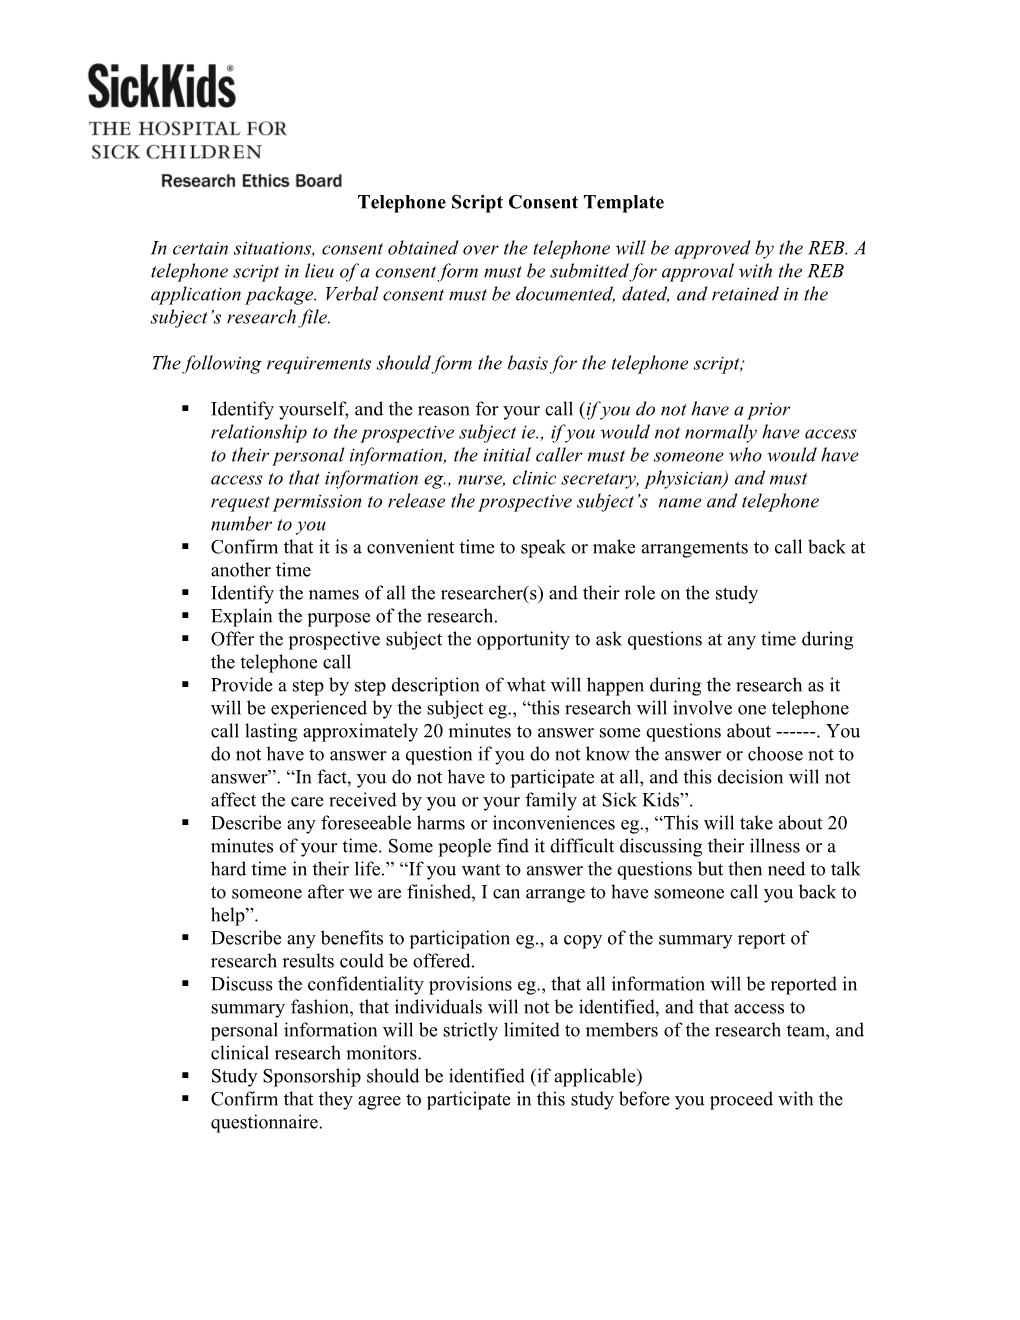 Consent Form Template for Telephone Scripts (June 2006)